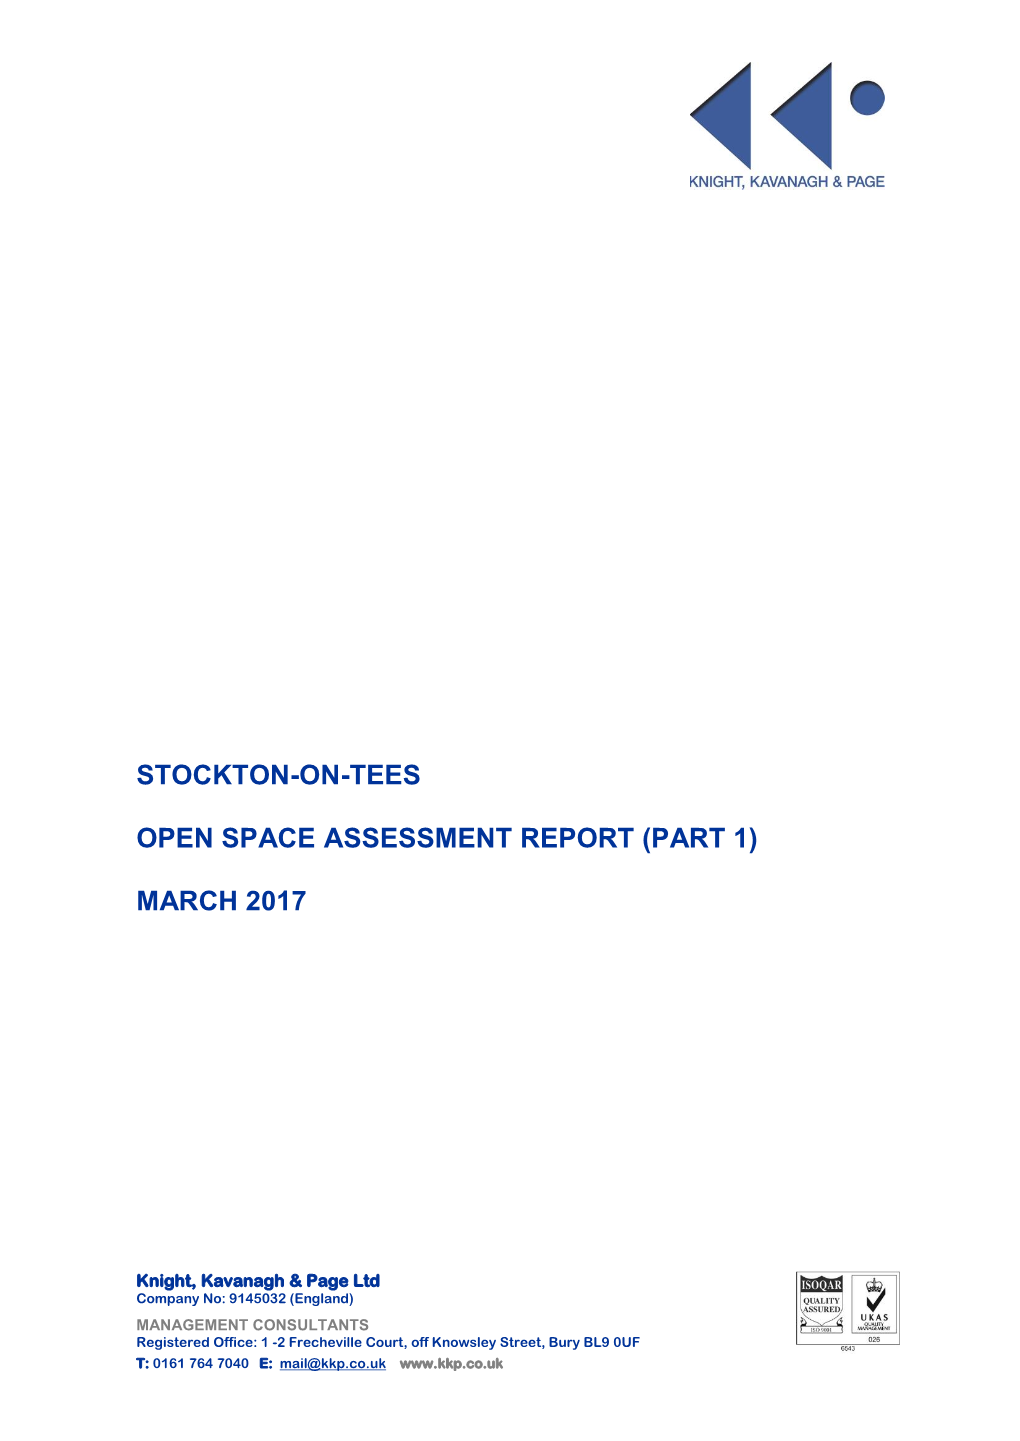 Stockton-On-Tees Open Space Assessment Report (Part 1)